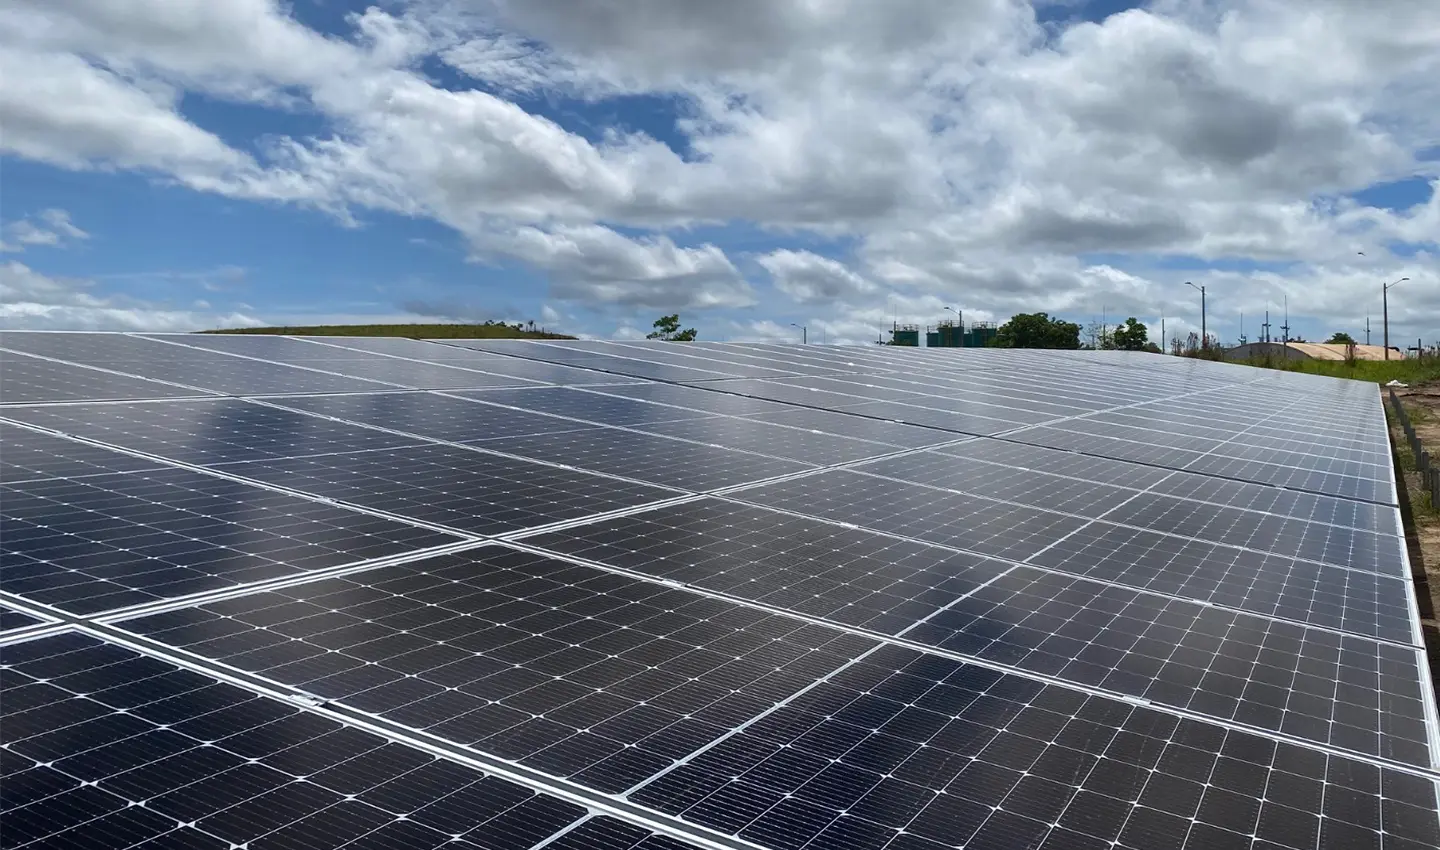 Frontera Energy's new solar farm project in Colombia